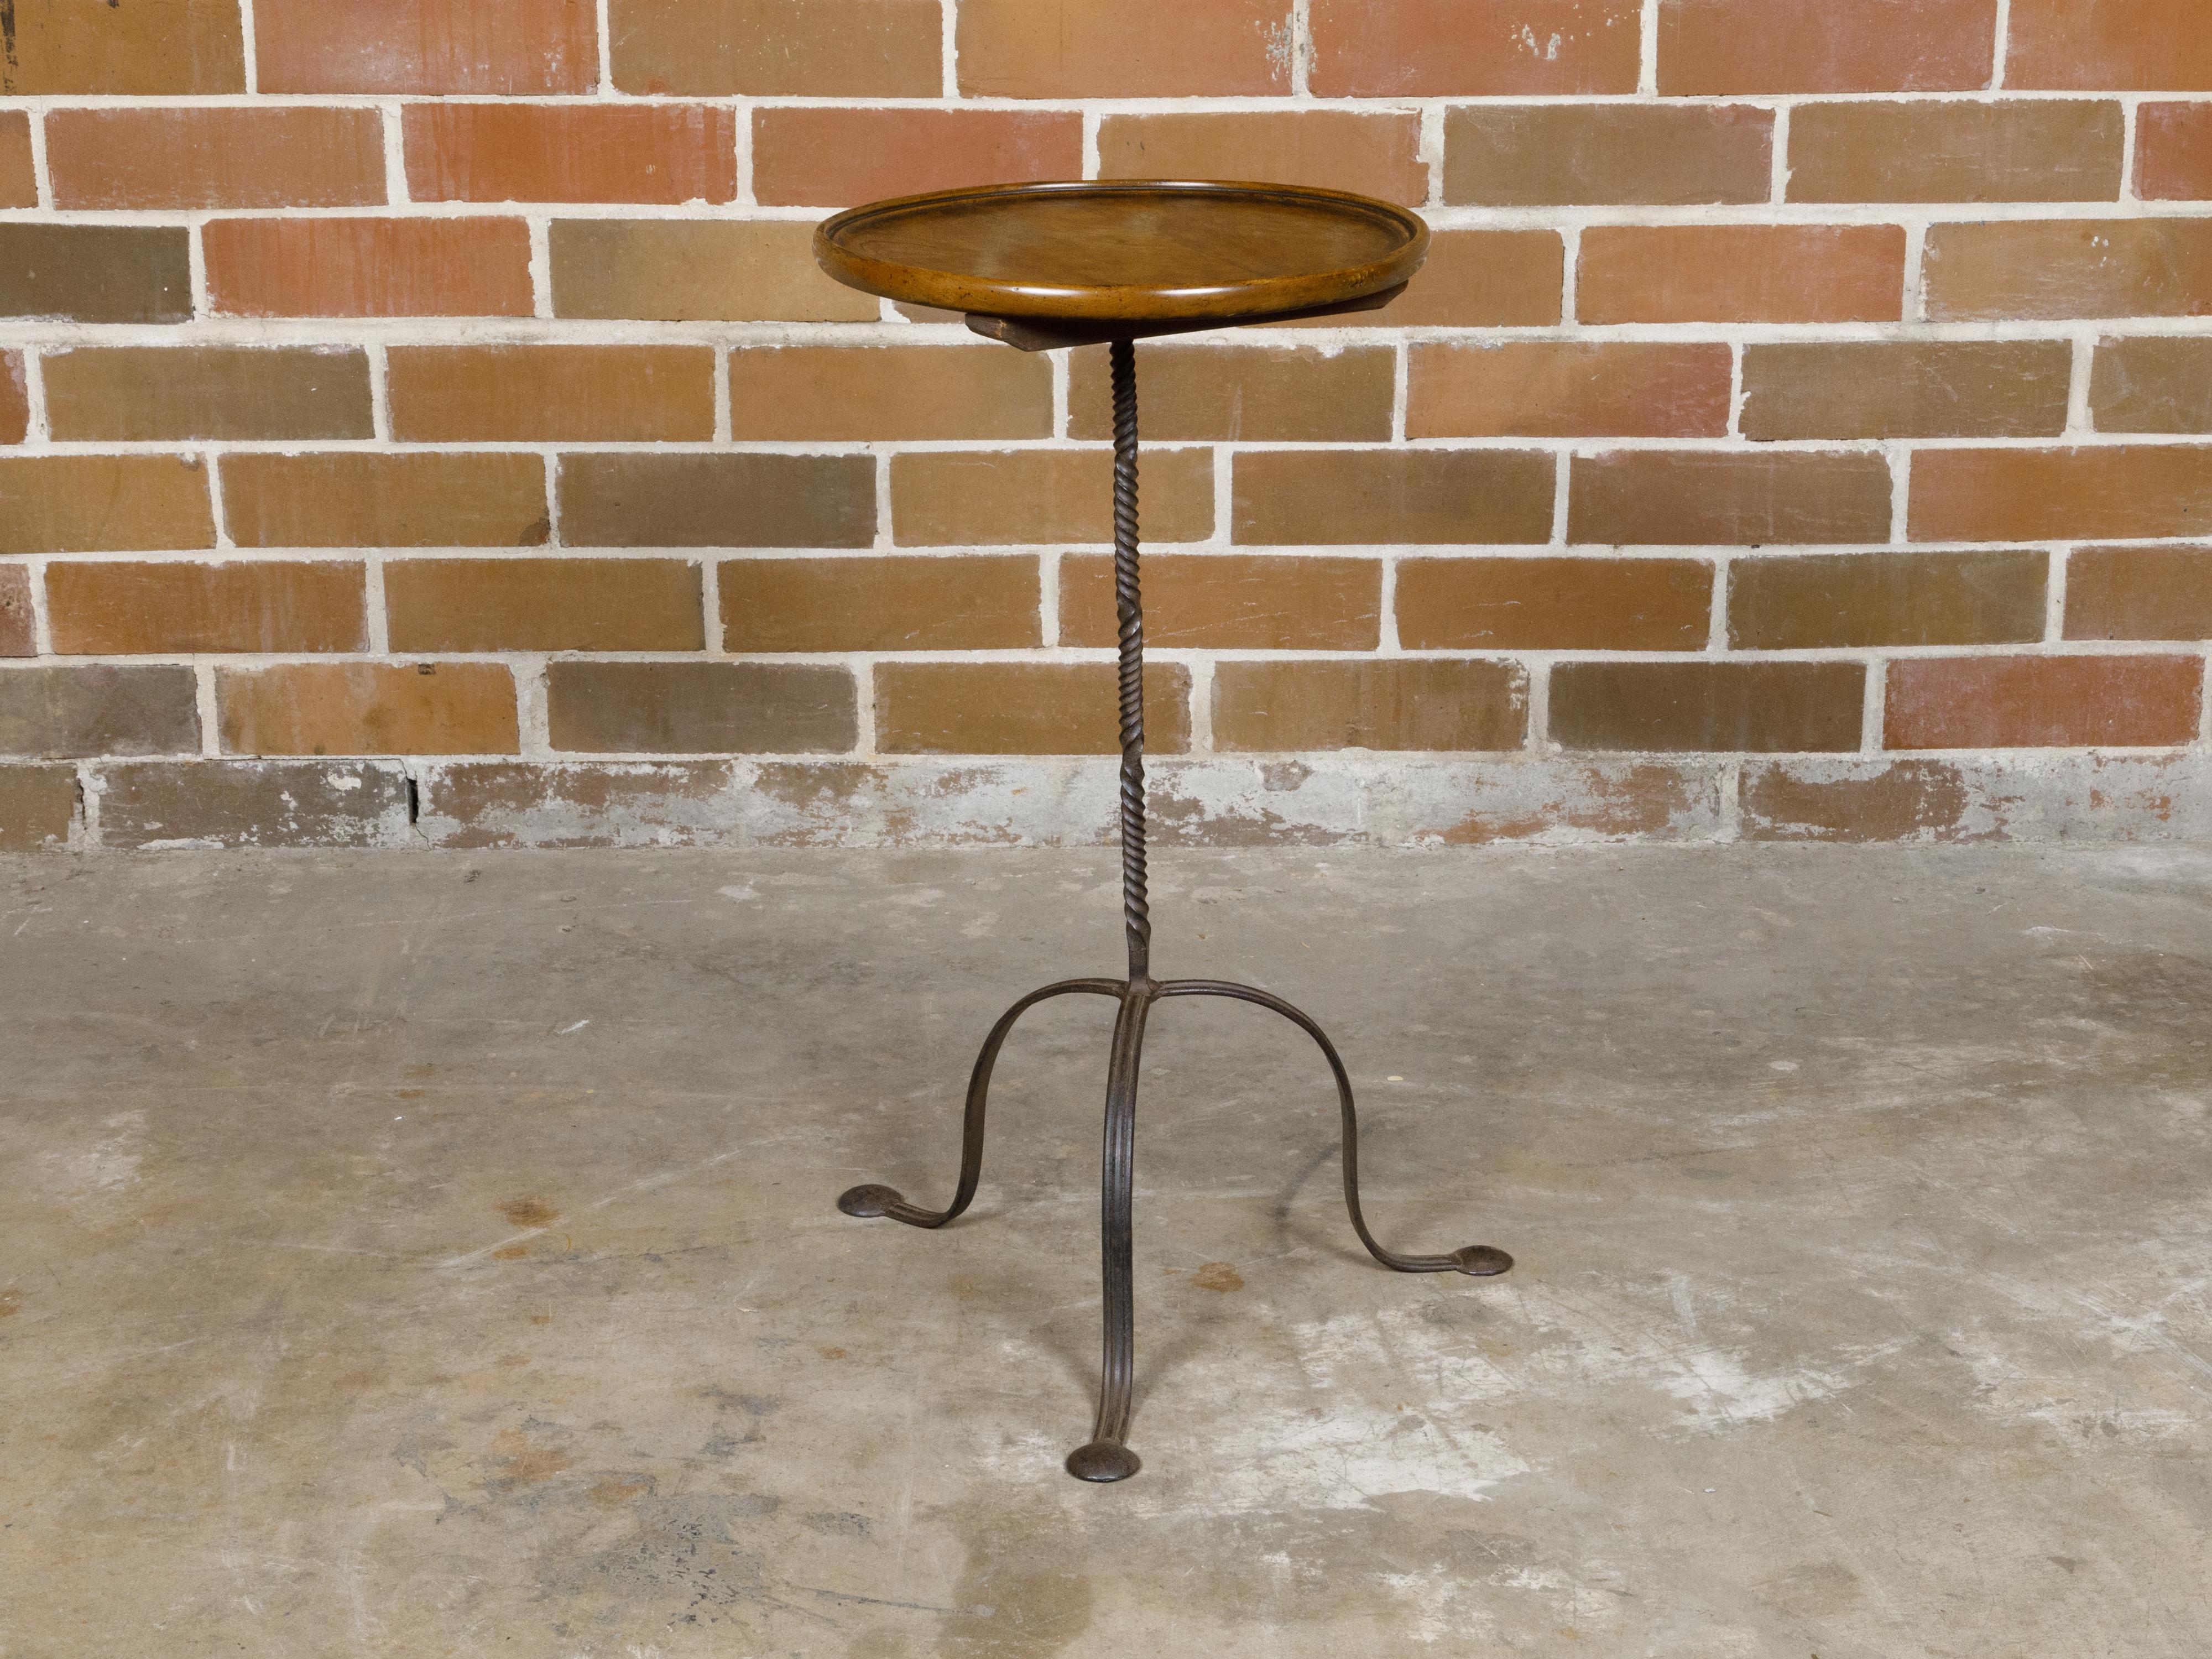 A French side table from circa 1920 with circular wooden tray top and iron base. This charming French side table, dating back to circa 1920, gracefully combines the warmth of a circular wooden tray top with the simple elegance of an iron base. The